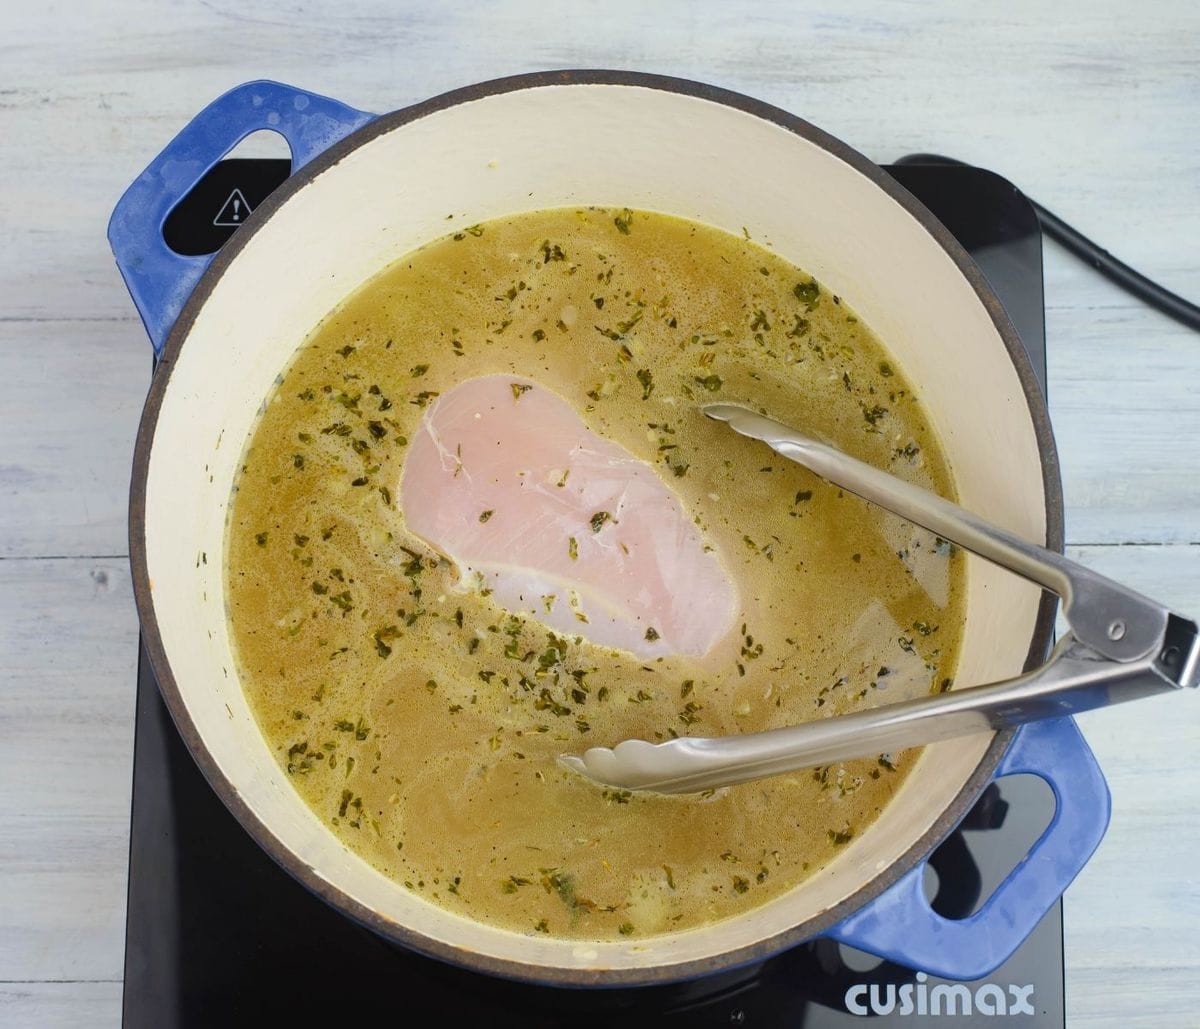 A chicken breast in the pot with chicken broth.